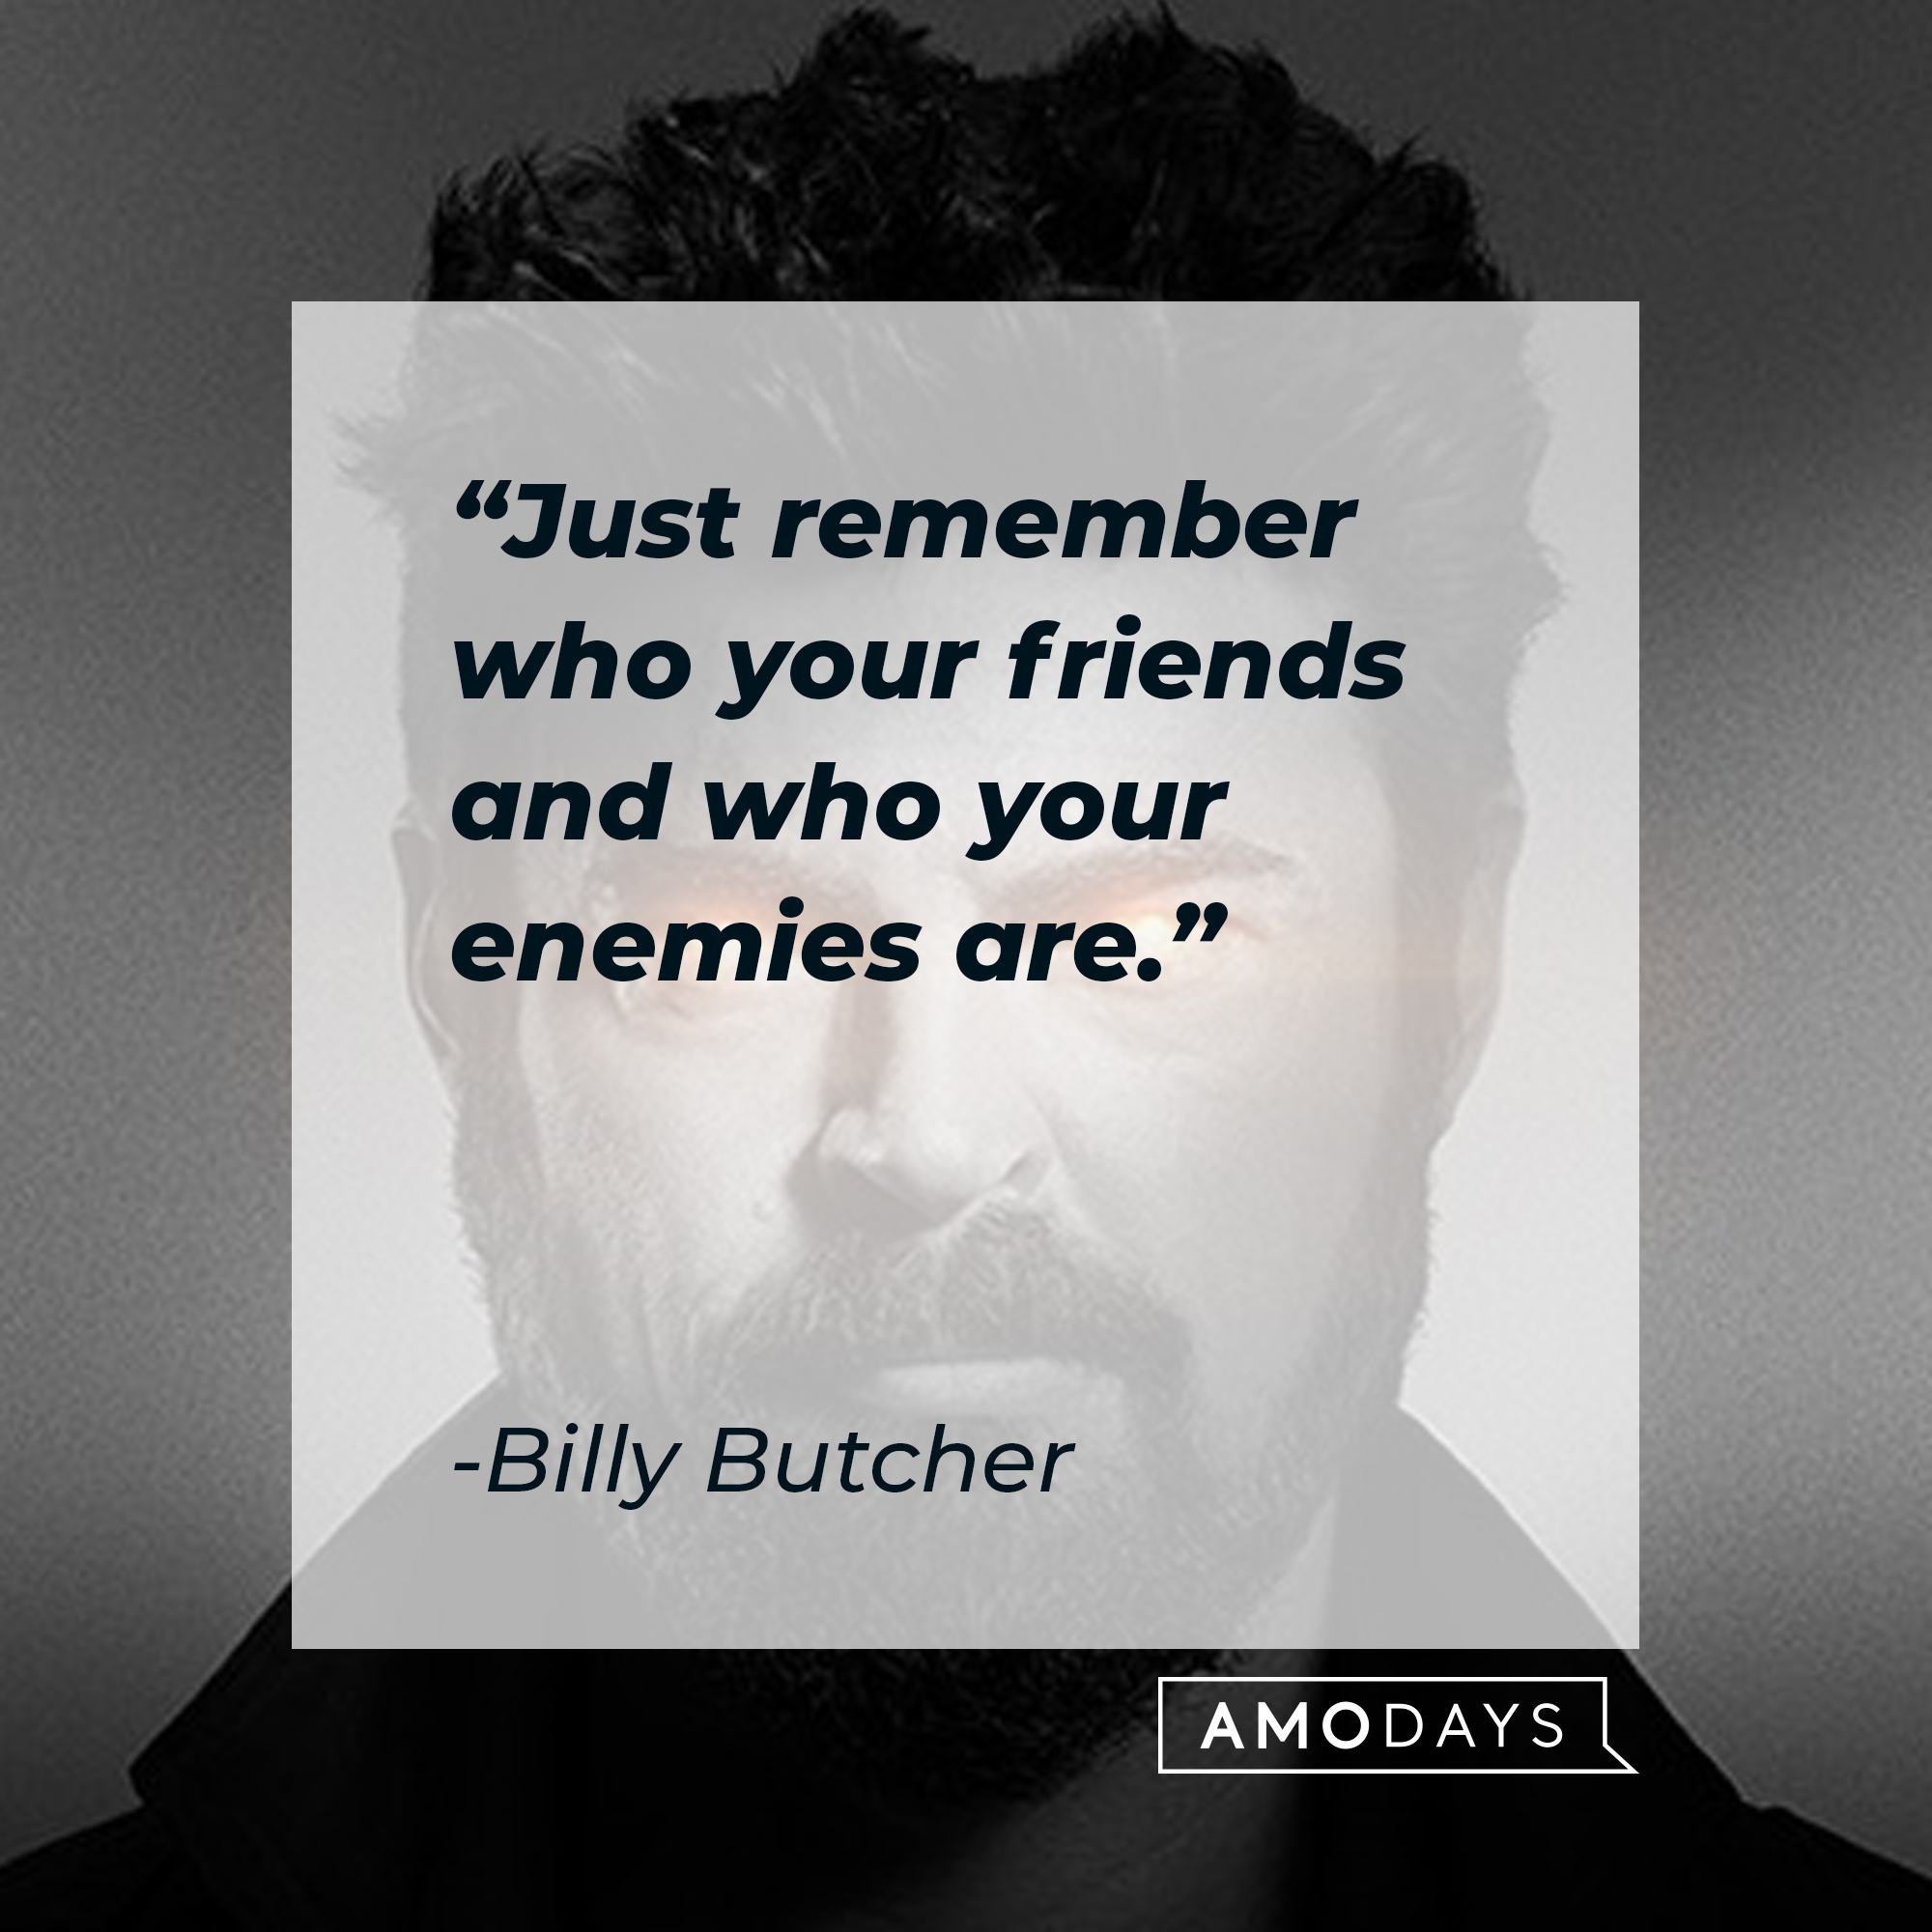 Billy Butcher's quote: "Just remember who your friends and who your enemies are." | Source: Facebook.com/TheBoysTV